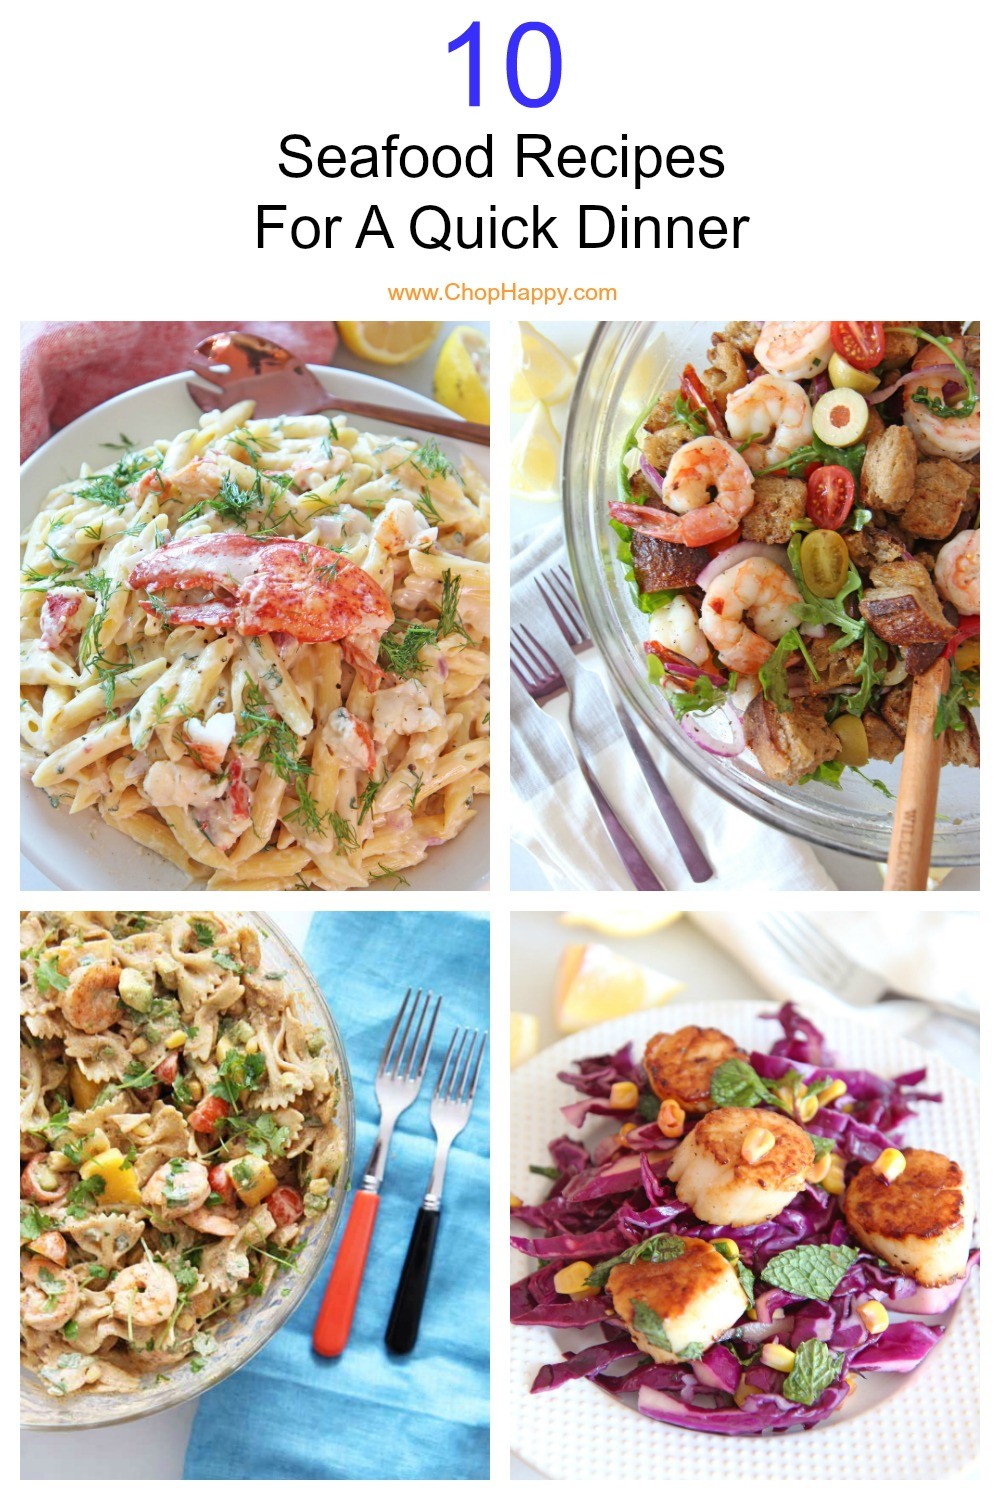 10 Seafood Recipes For a Quick Dinner